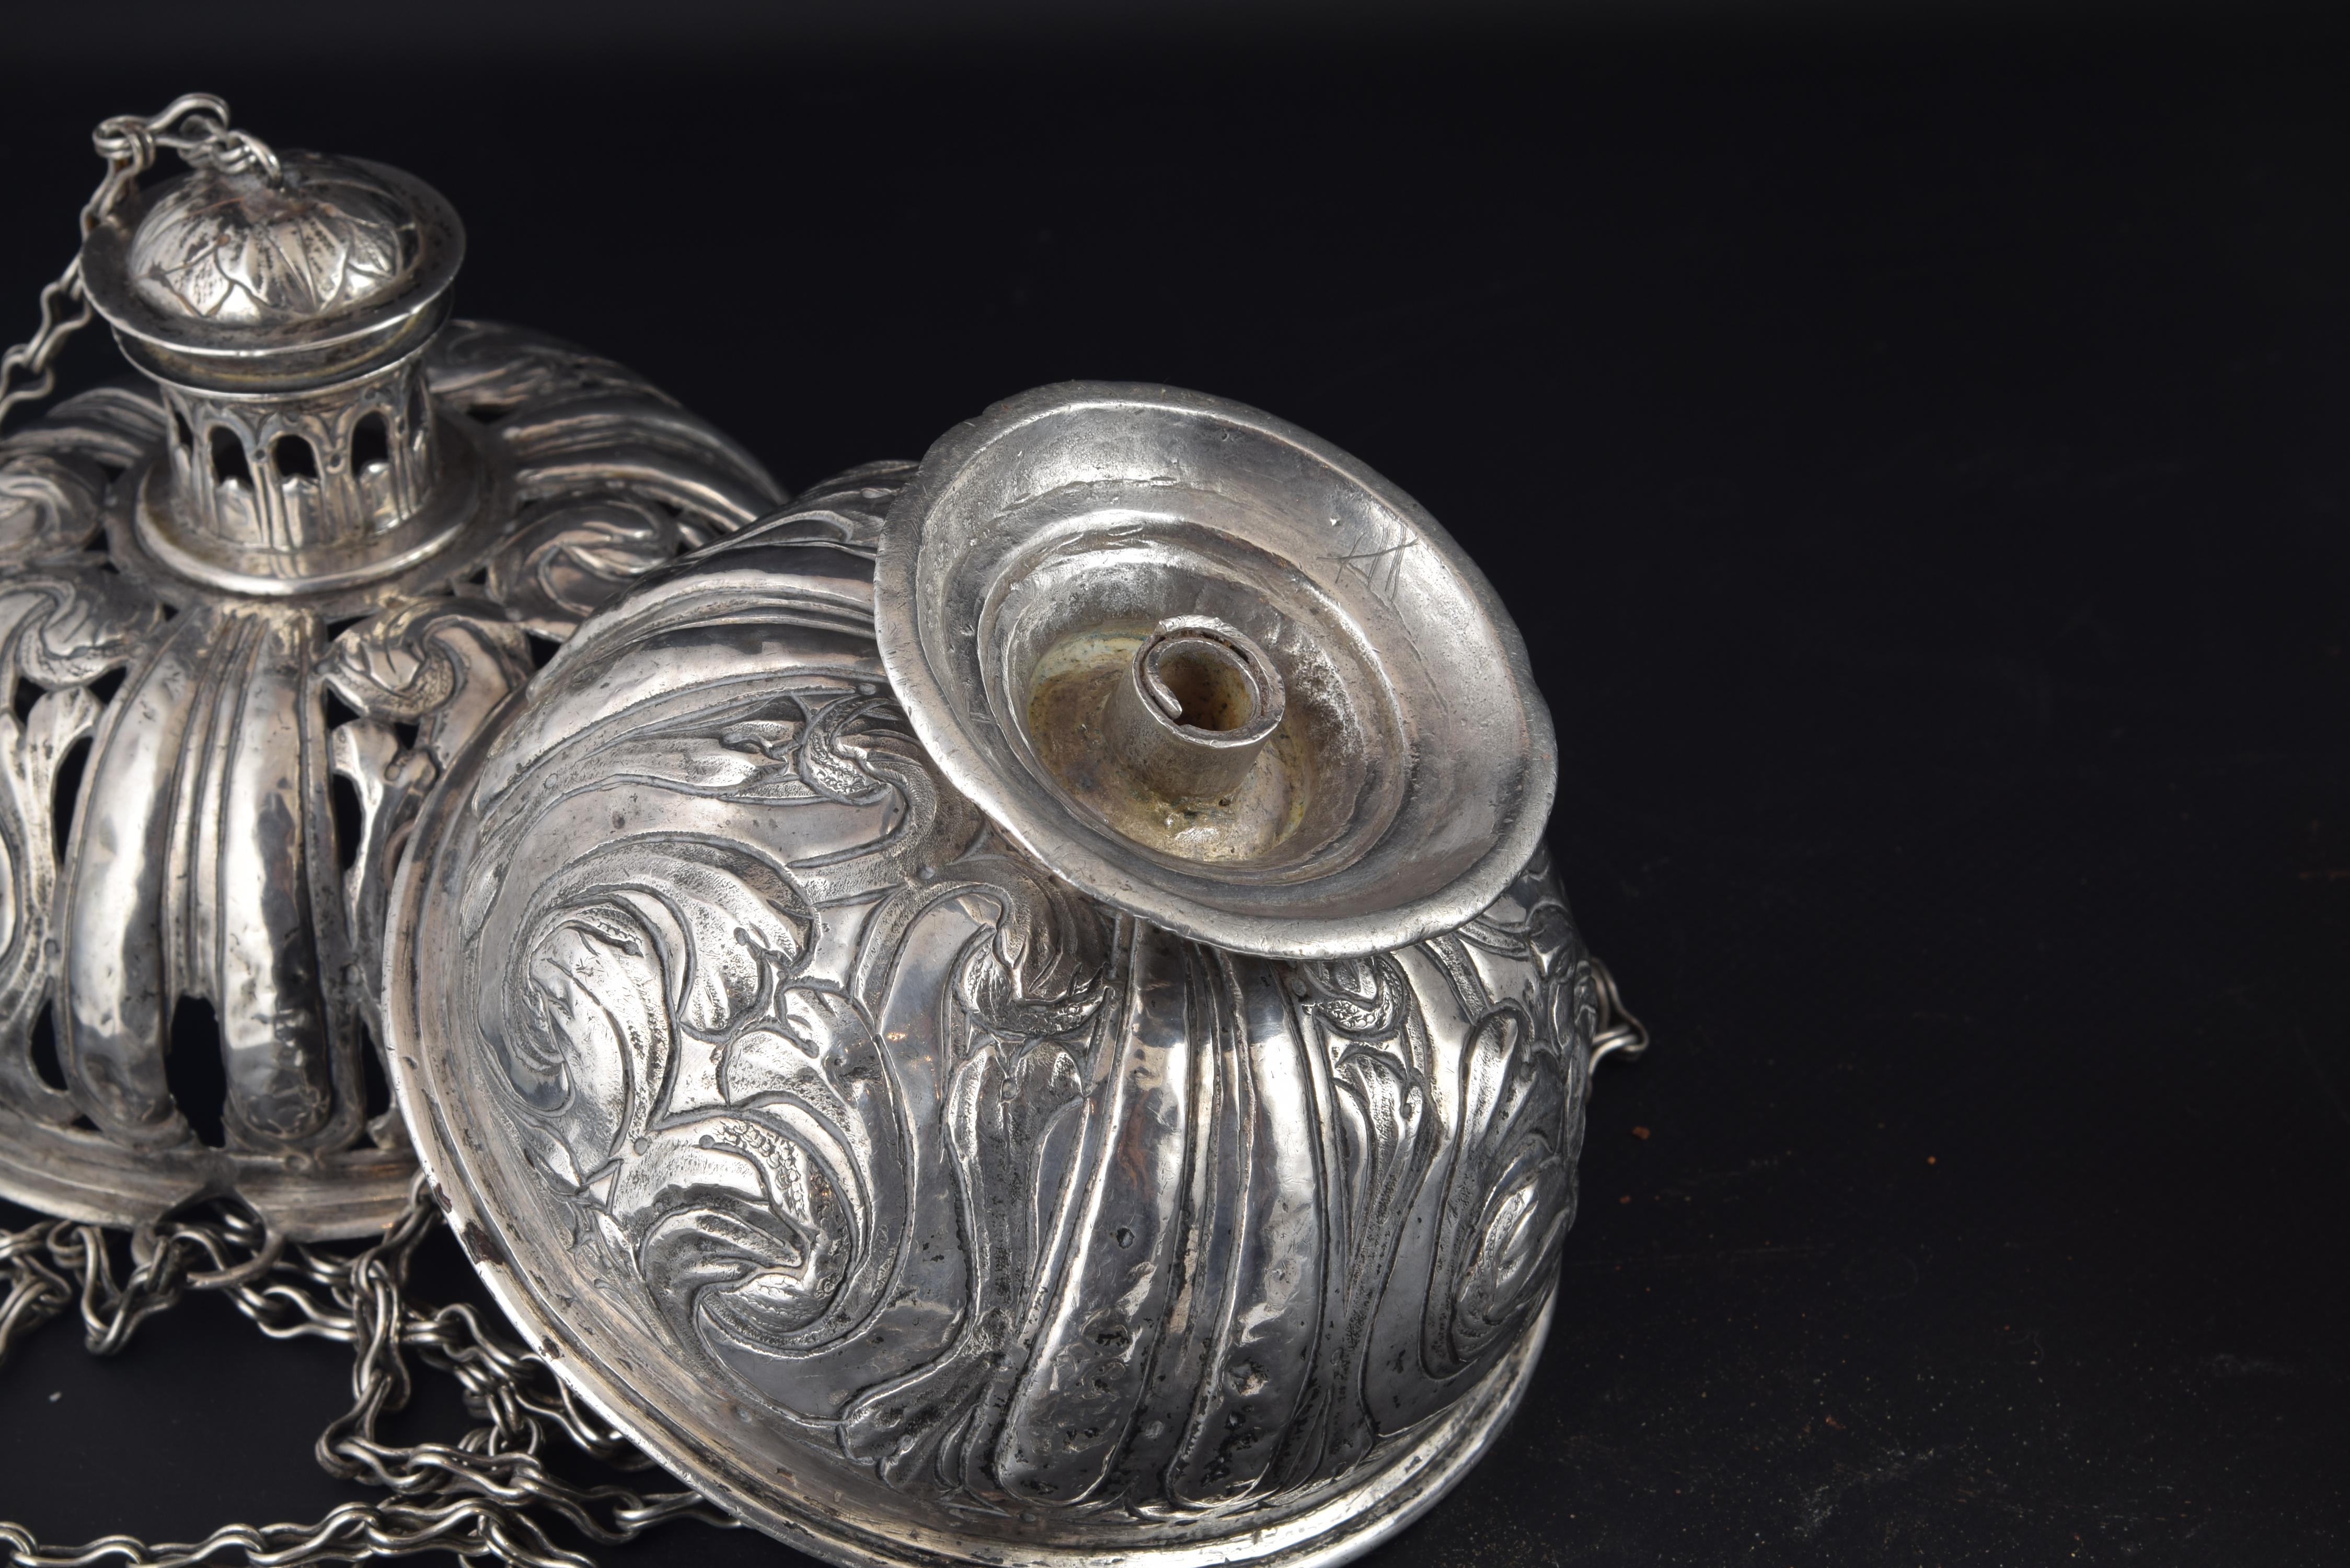 This piece does not follow the most usual type in the form of Castilian censers of the 17th century, but the spherical ones are very common already in the Byzantine Empire and both in the West and in the Arab world since then. Compare outstanding